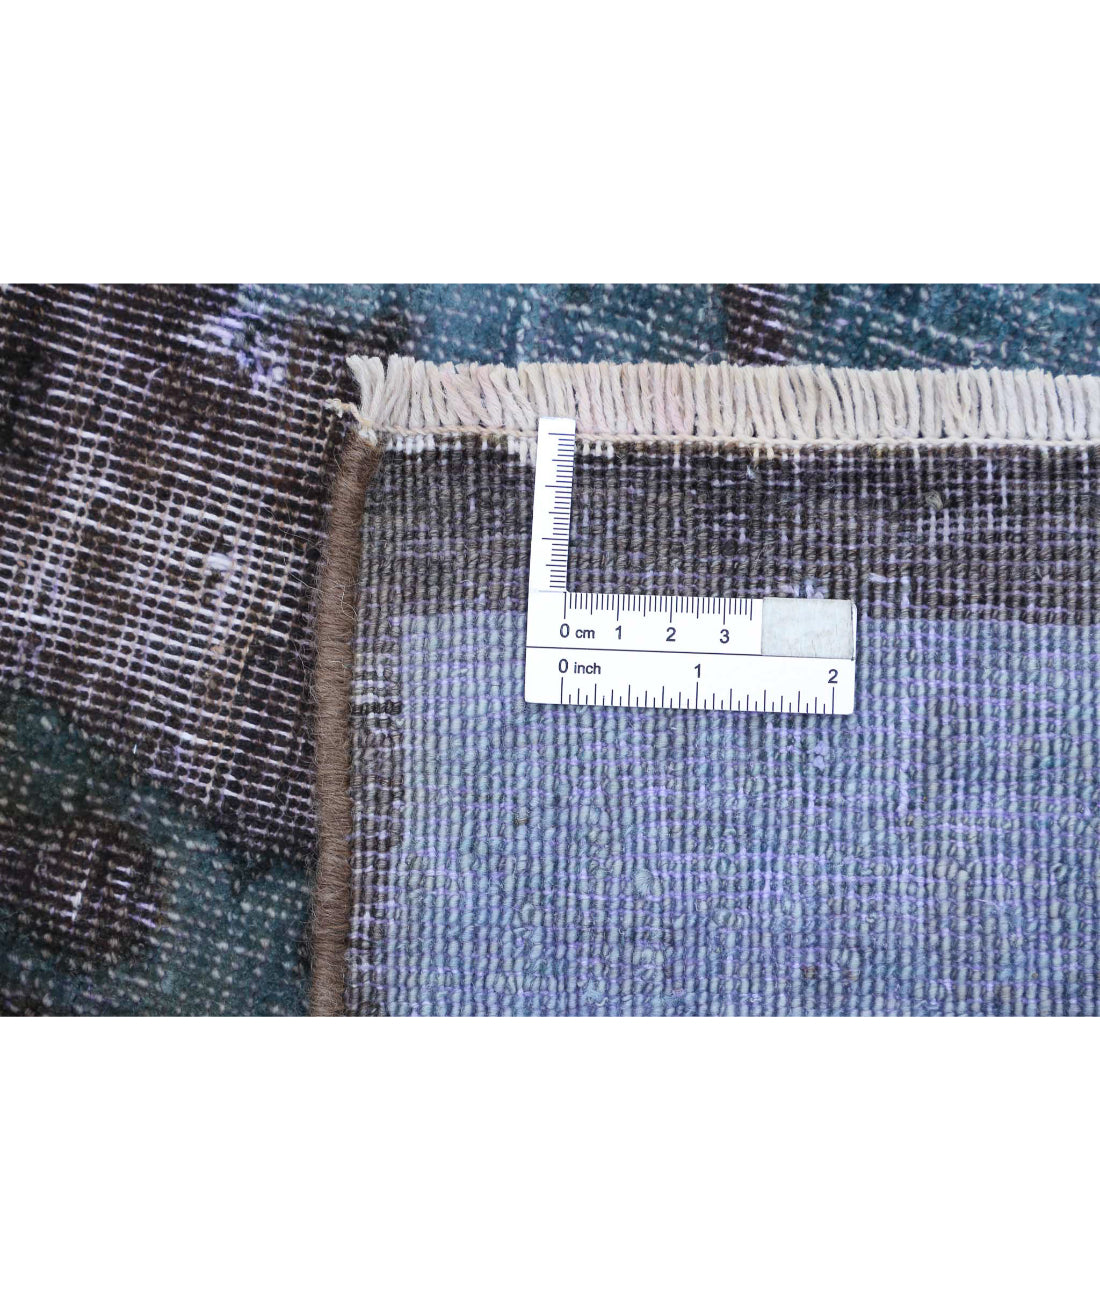 Onyx 8'9'' X 11'7'' Hand-Knotted Wool Rug 8'9'' x 11'7'' (263 X 348) / Blue / Lilac